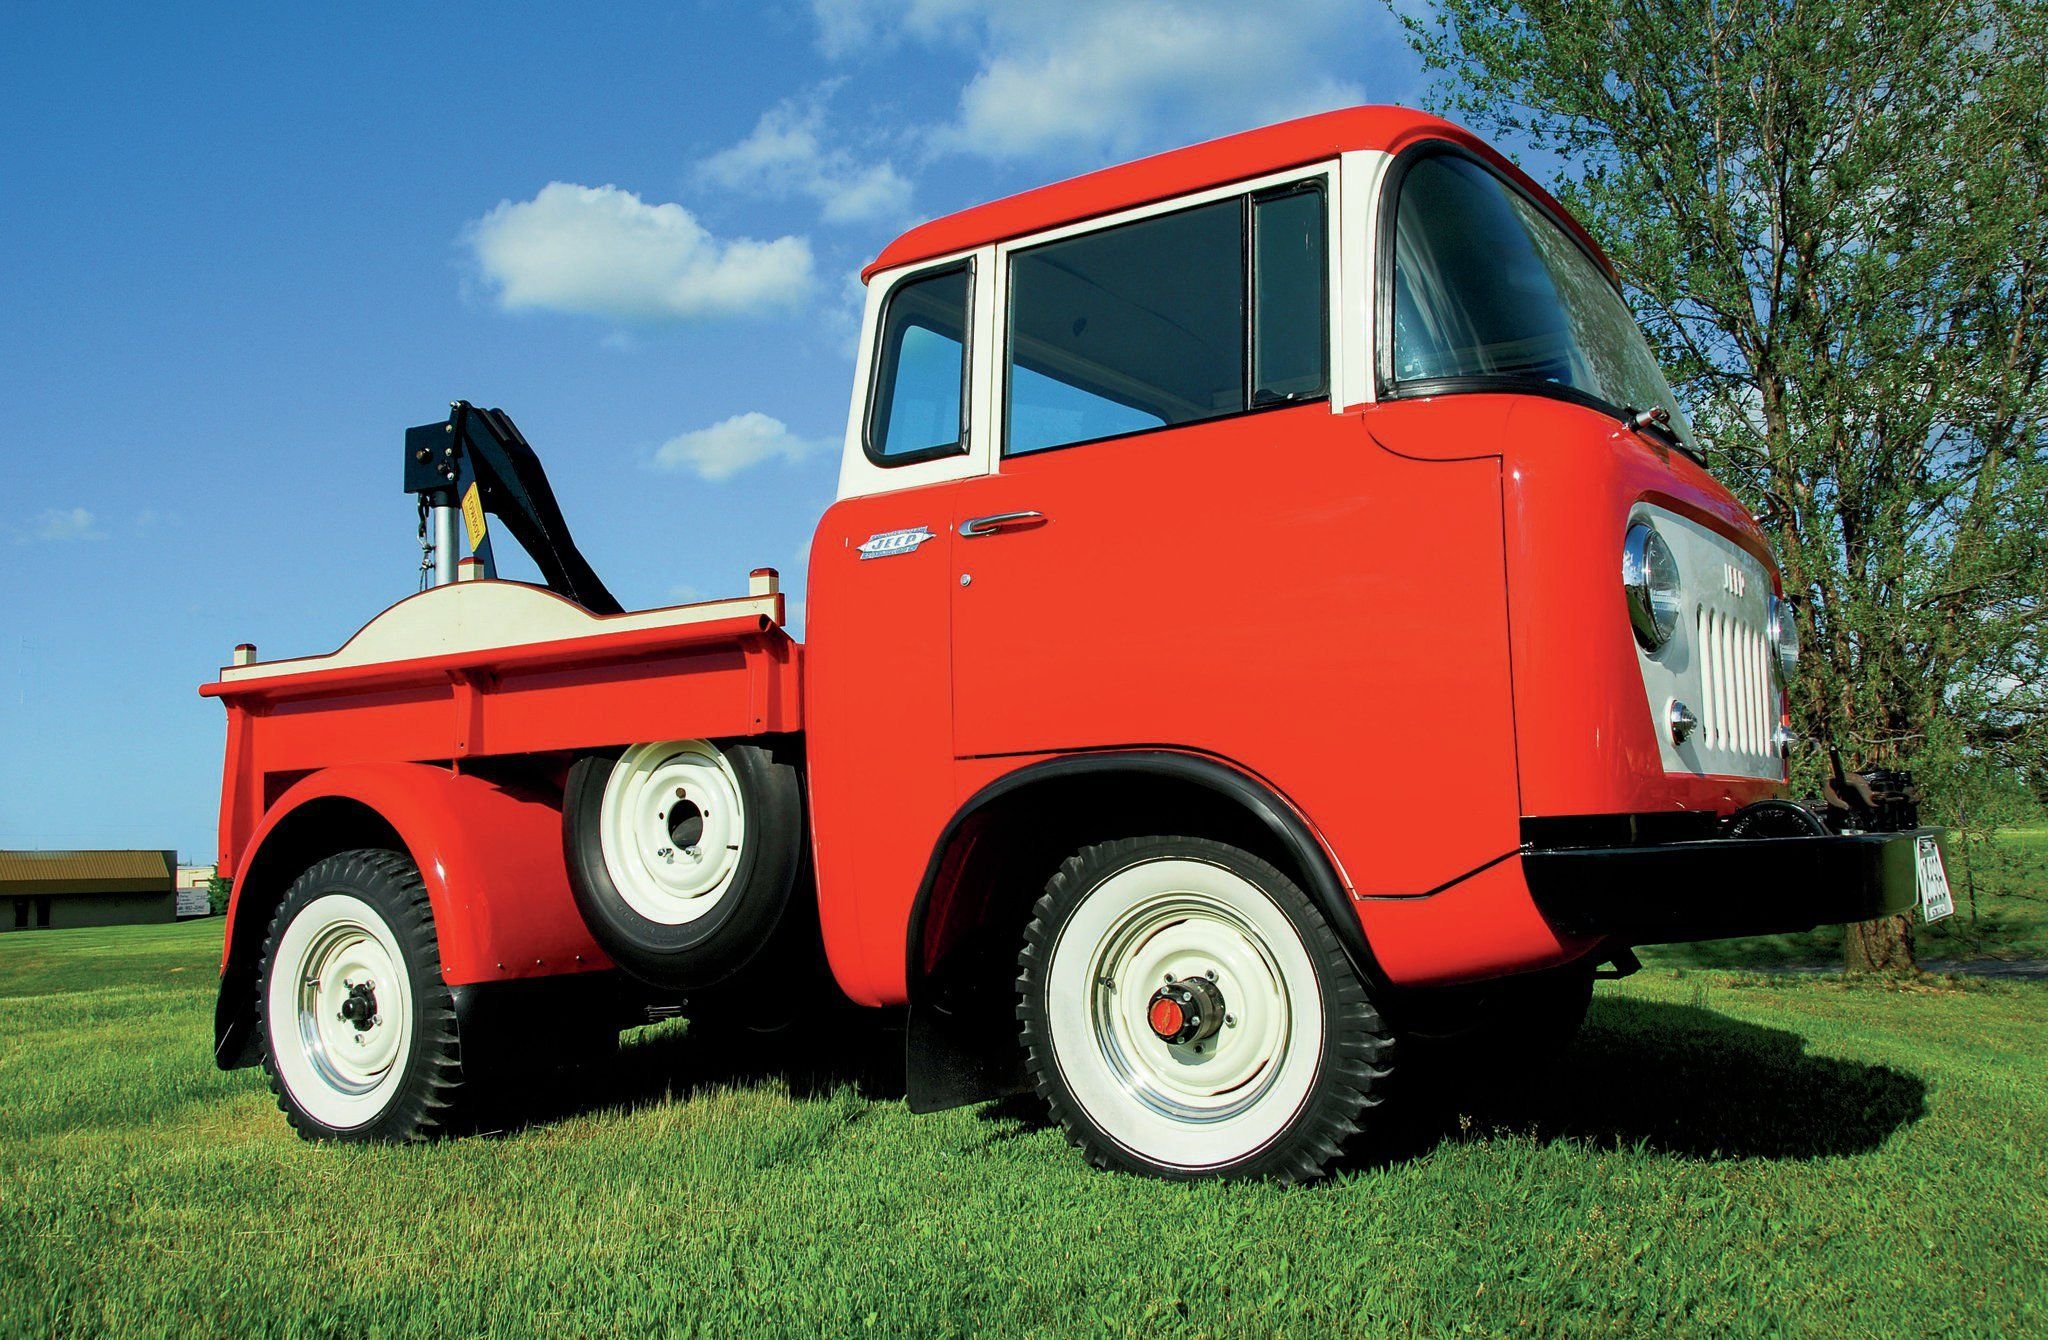 1957, Jeep, Fc150, Towtruck, Classic, 4x4, Tow, Emergency Wallpaper